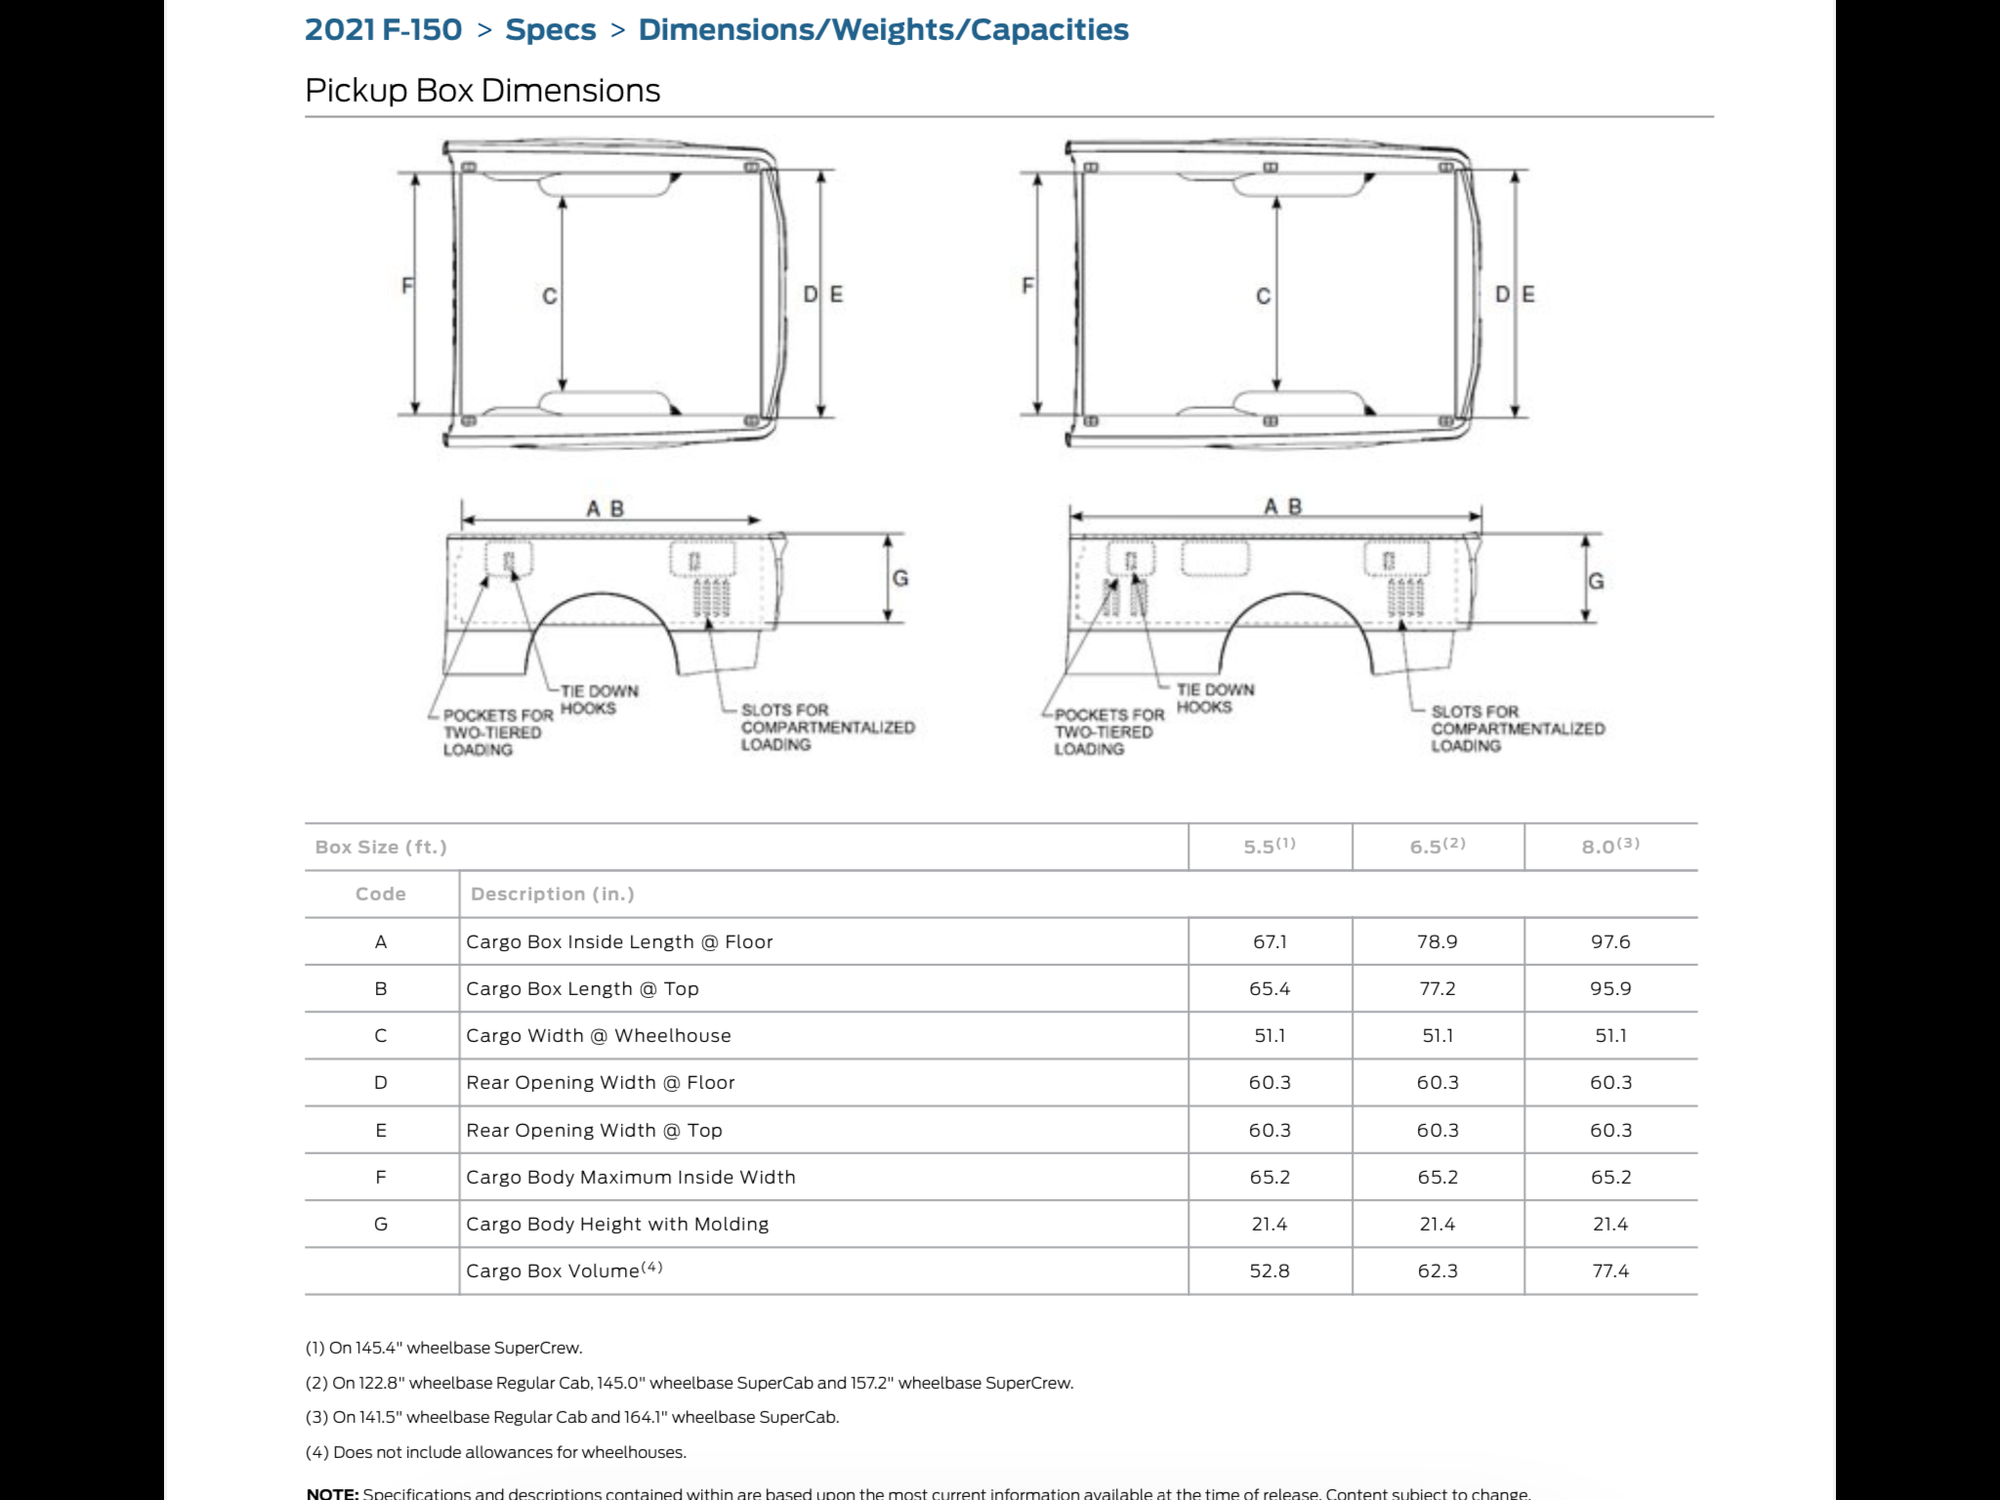 Dimensions Of A Ford F150 Truck Bed